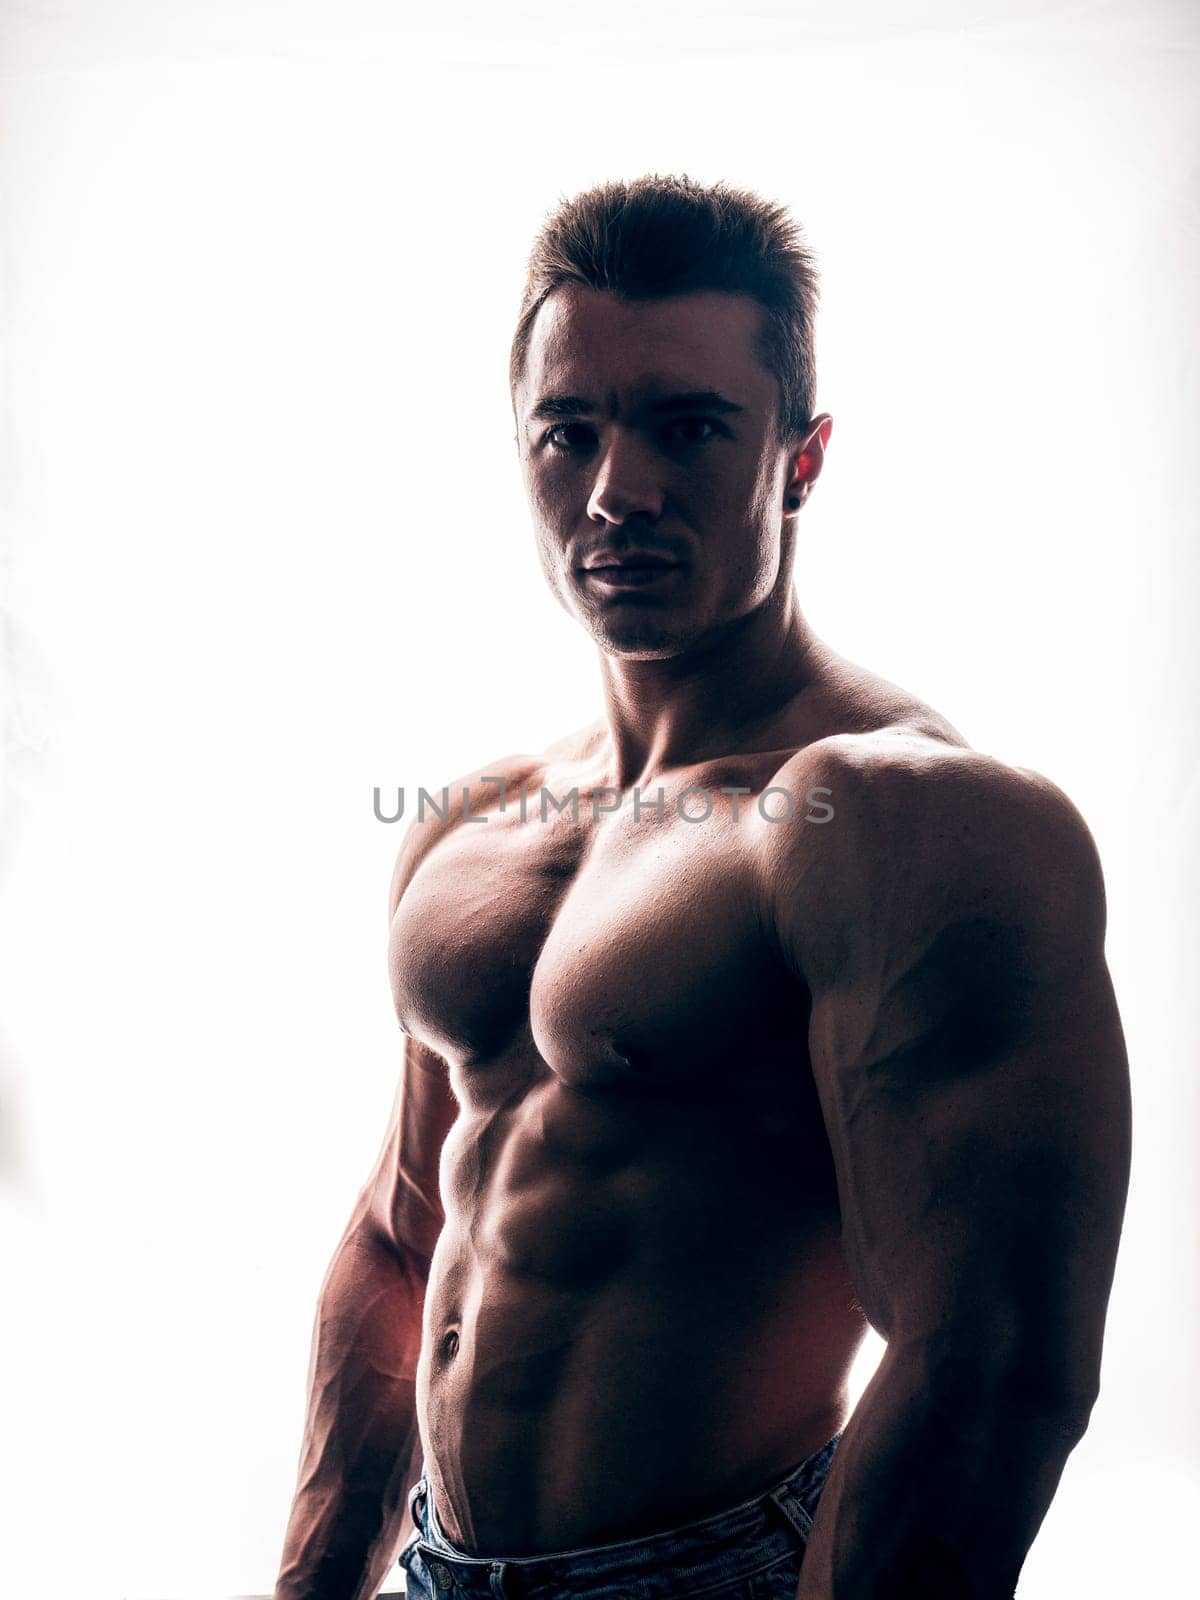 Muscles in Motion: Captivating Image of an Attractive, Shirtless Male Bodybuilder by artofphoto